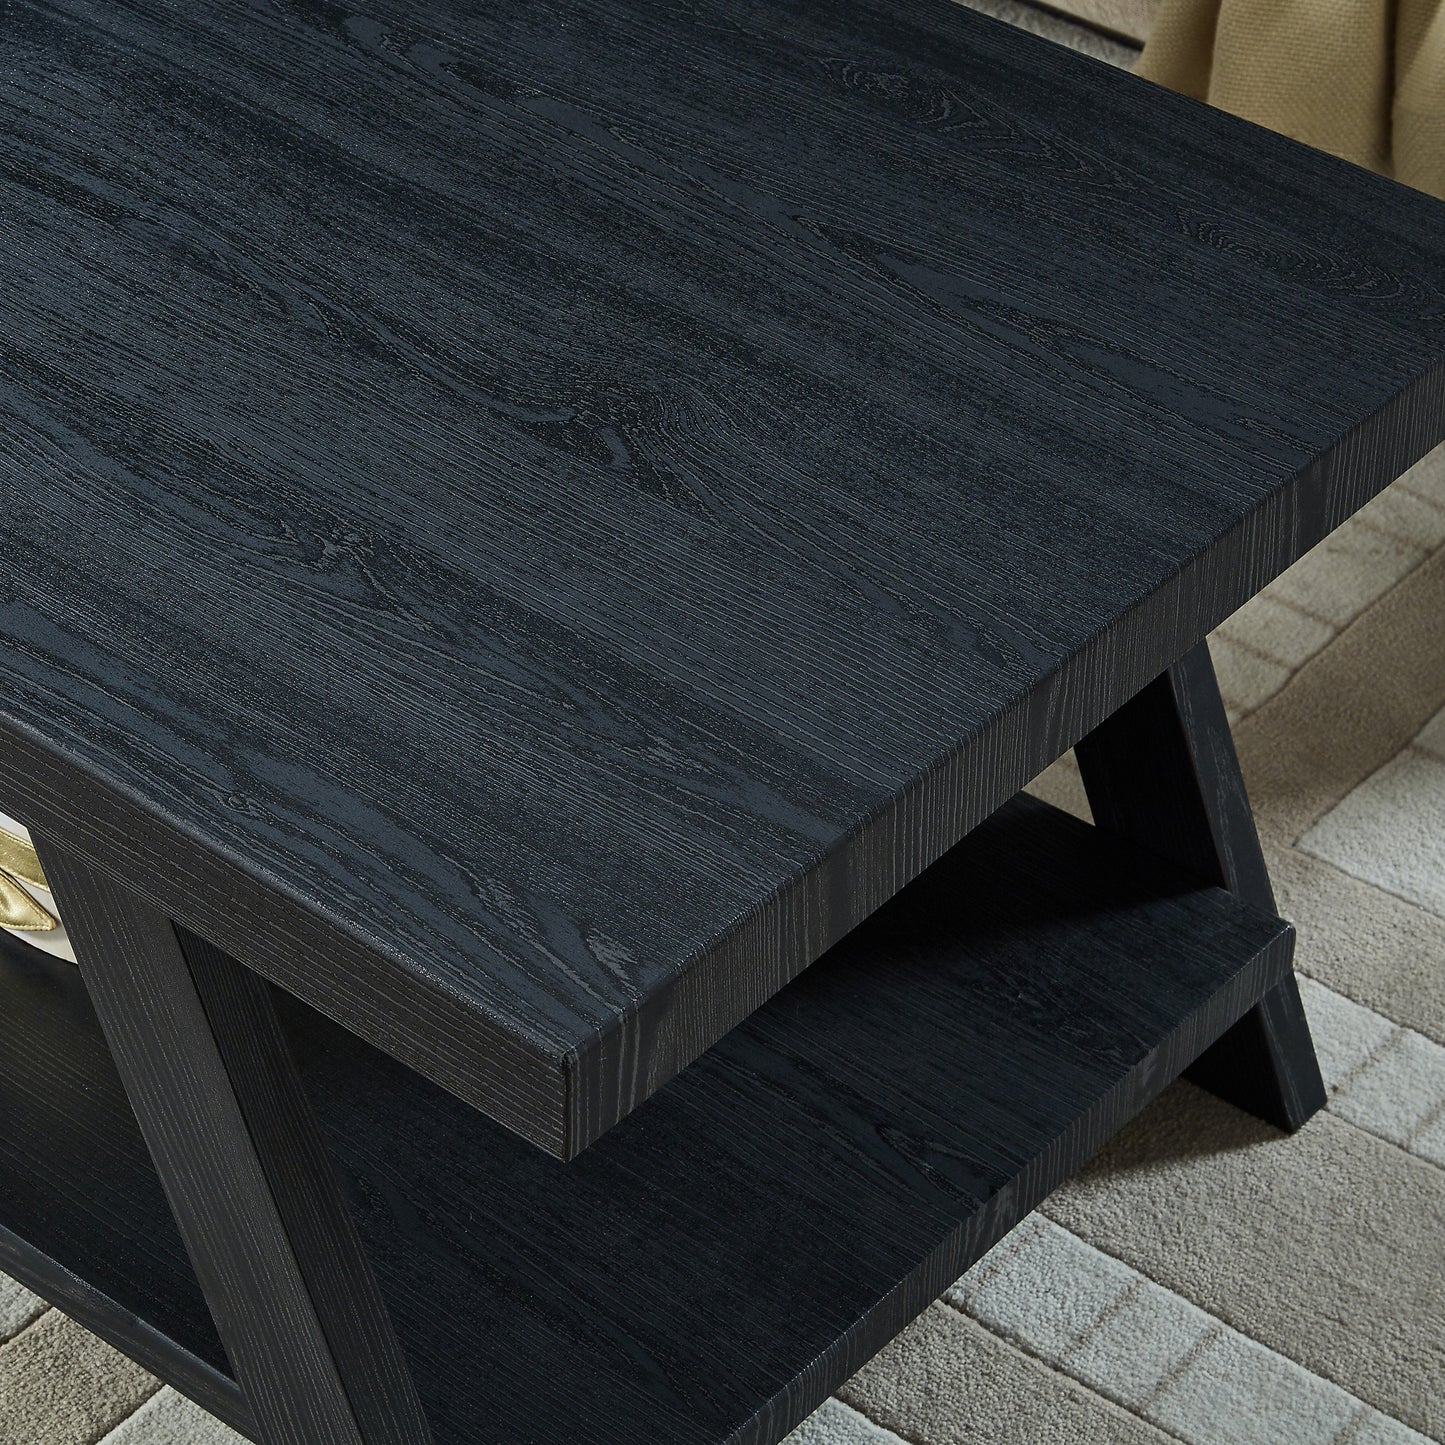 Athens Contemporary Replicated Wood Shelf End Table in Black Finish